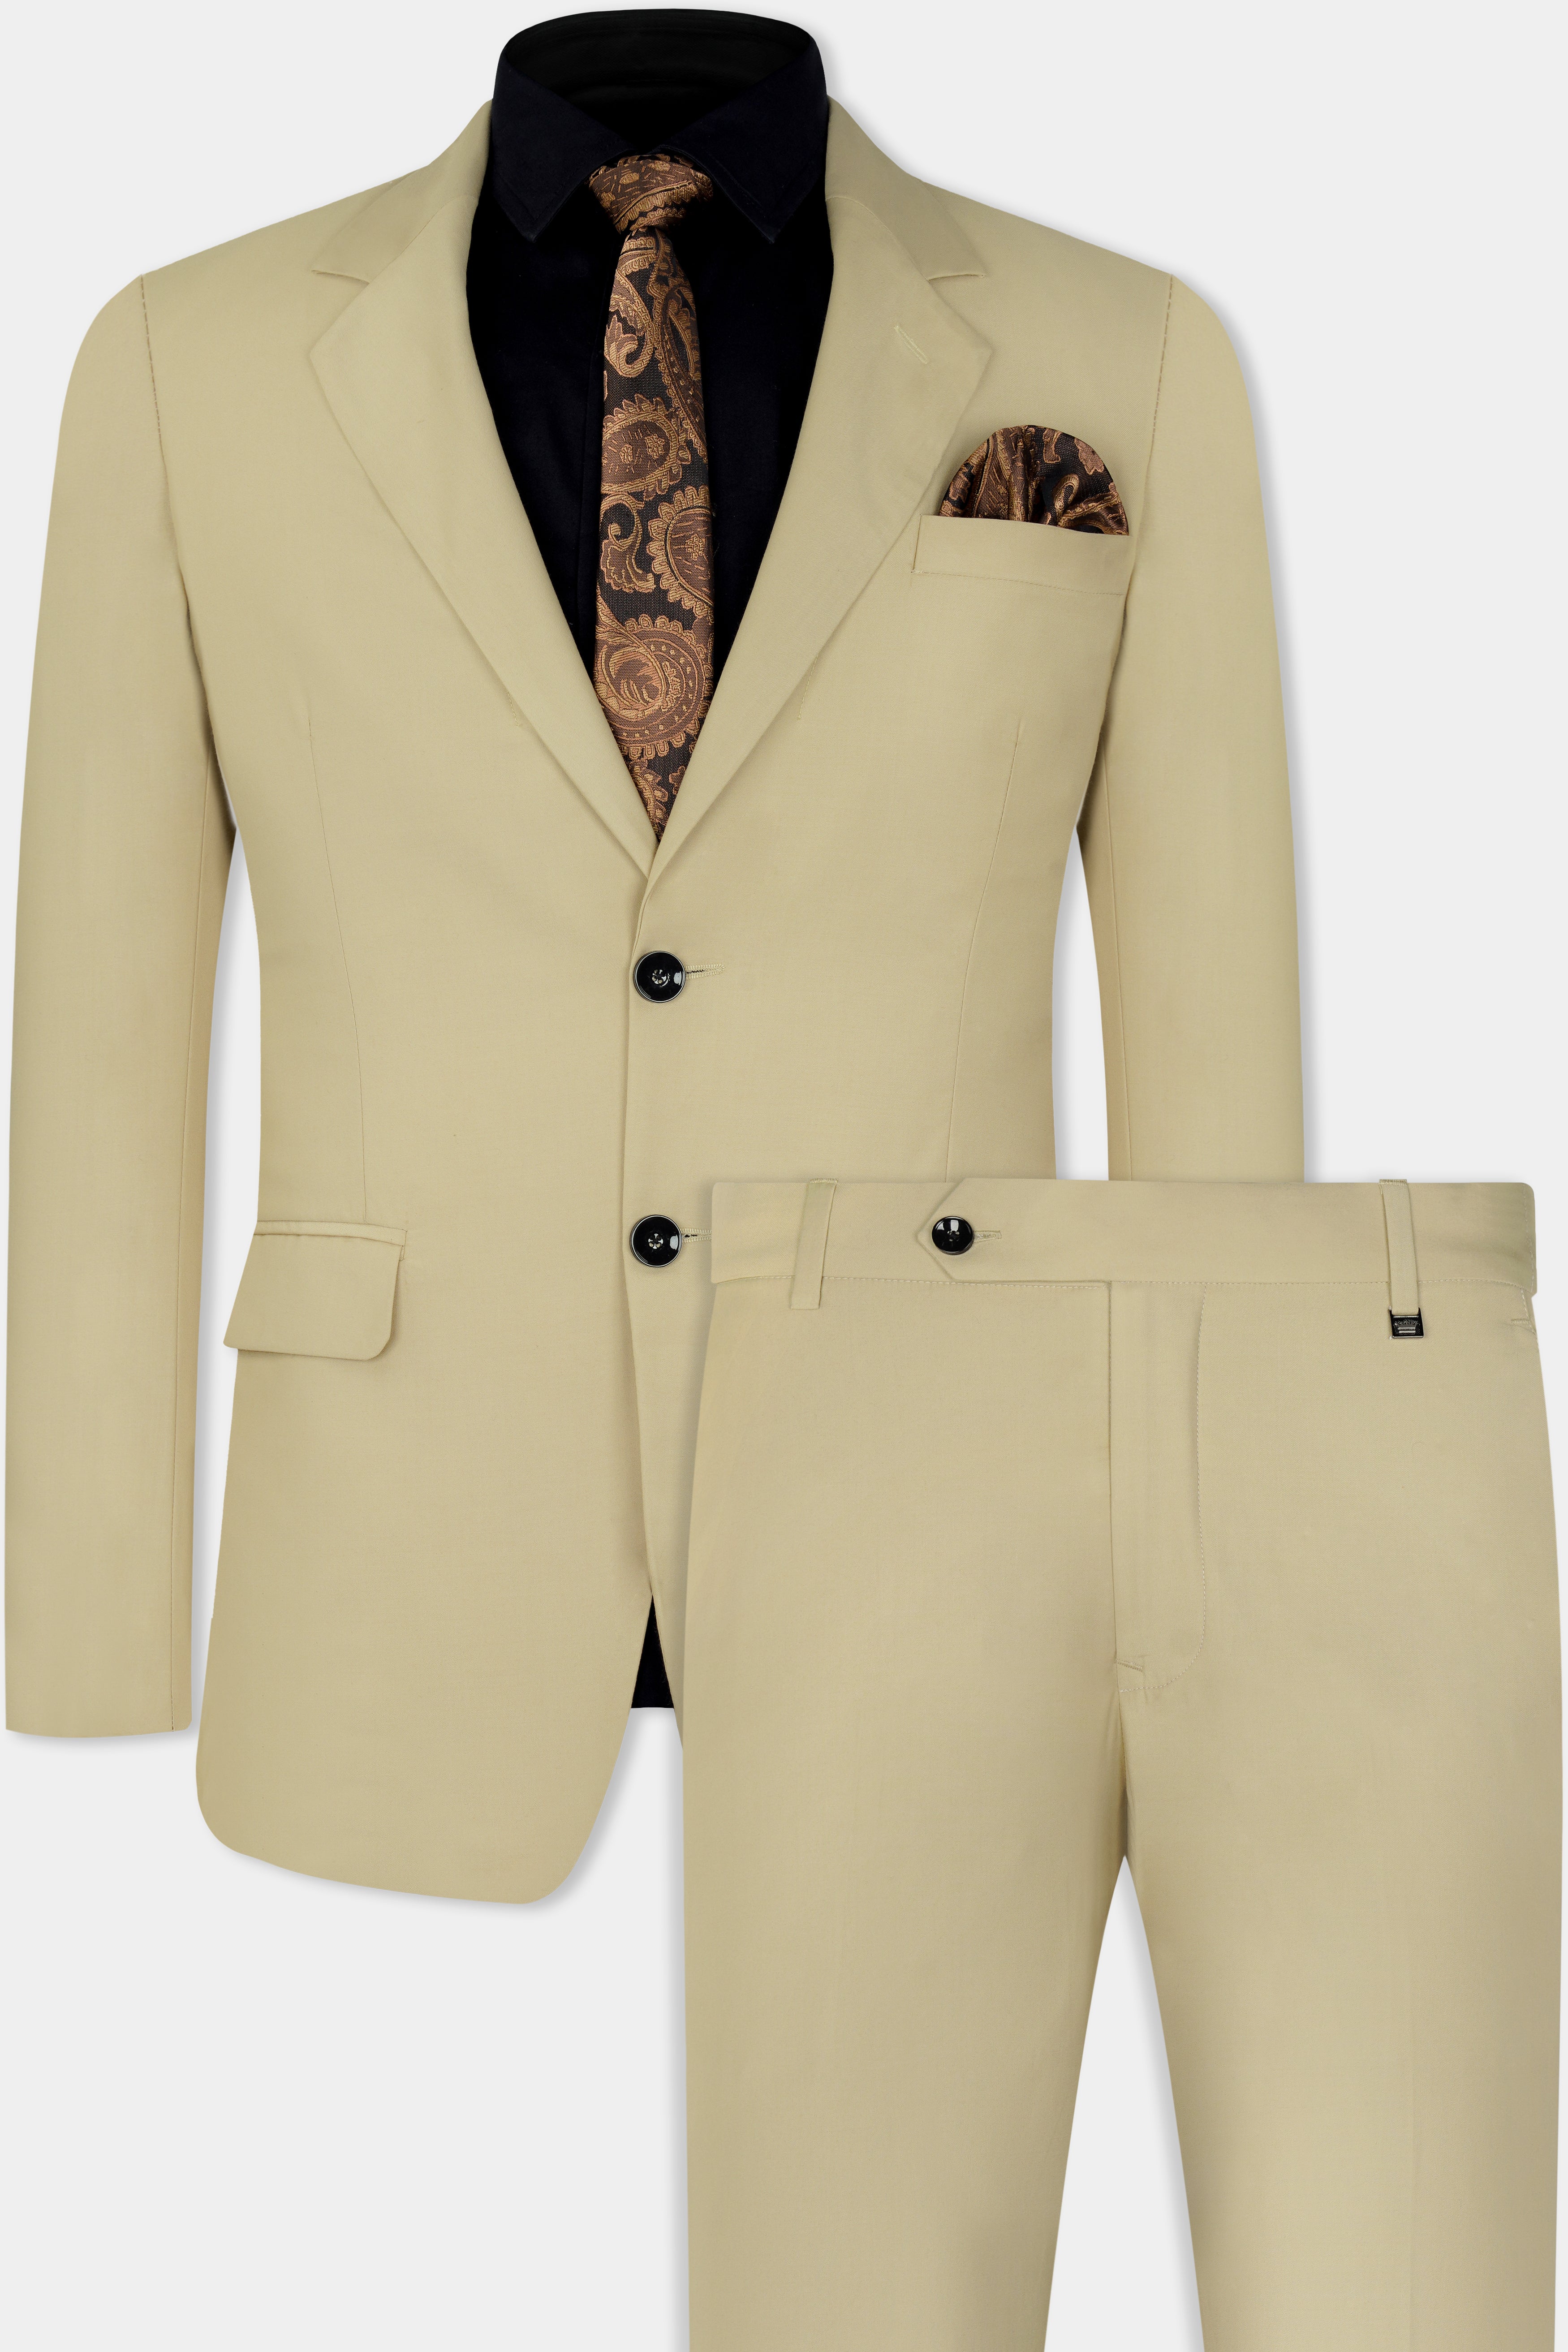 Yuma Cream Wool Rich Single Breasted Suit ST2925-SB-36,ST2925-SB-38,ST2925-SB-40,ST2925-SB-42,ST2925-SB-44,ST2925-SB-46,ST2925-SB-48,ST2925-SB-50,ST2925-SB-52,ST2925-SB-54,ST2925-SB-56,ST2925-SB-58,ST2925-SB-60